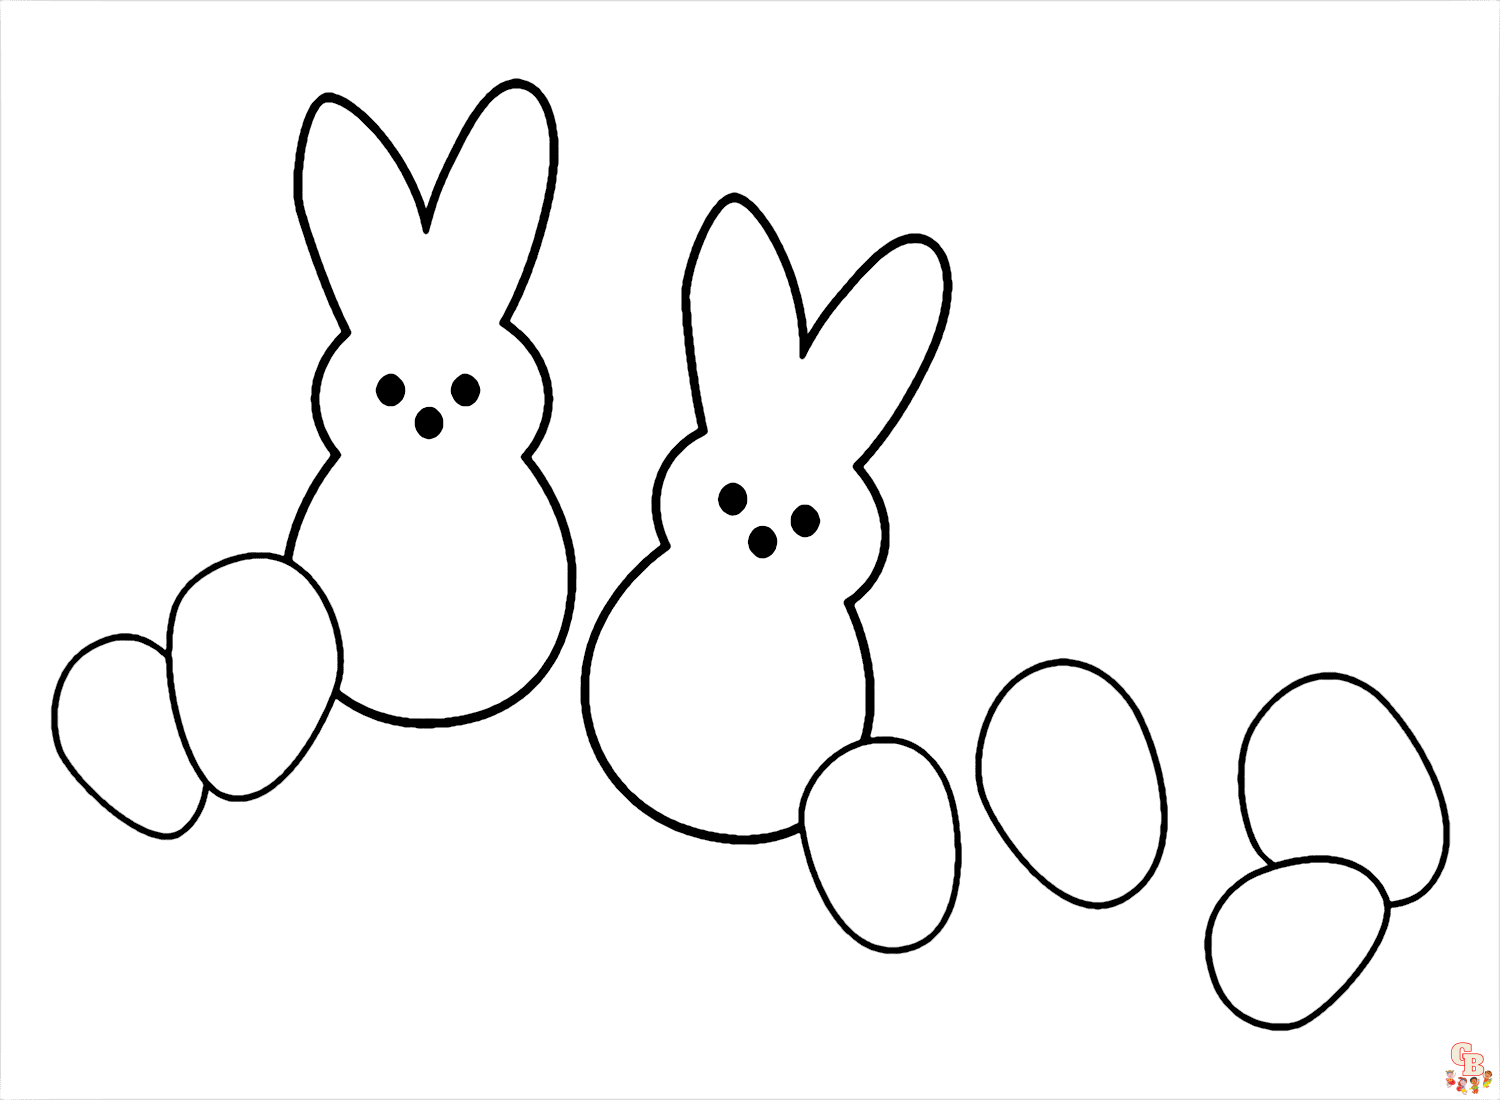 Prinatble peeps coloring pages free for kids and adults